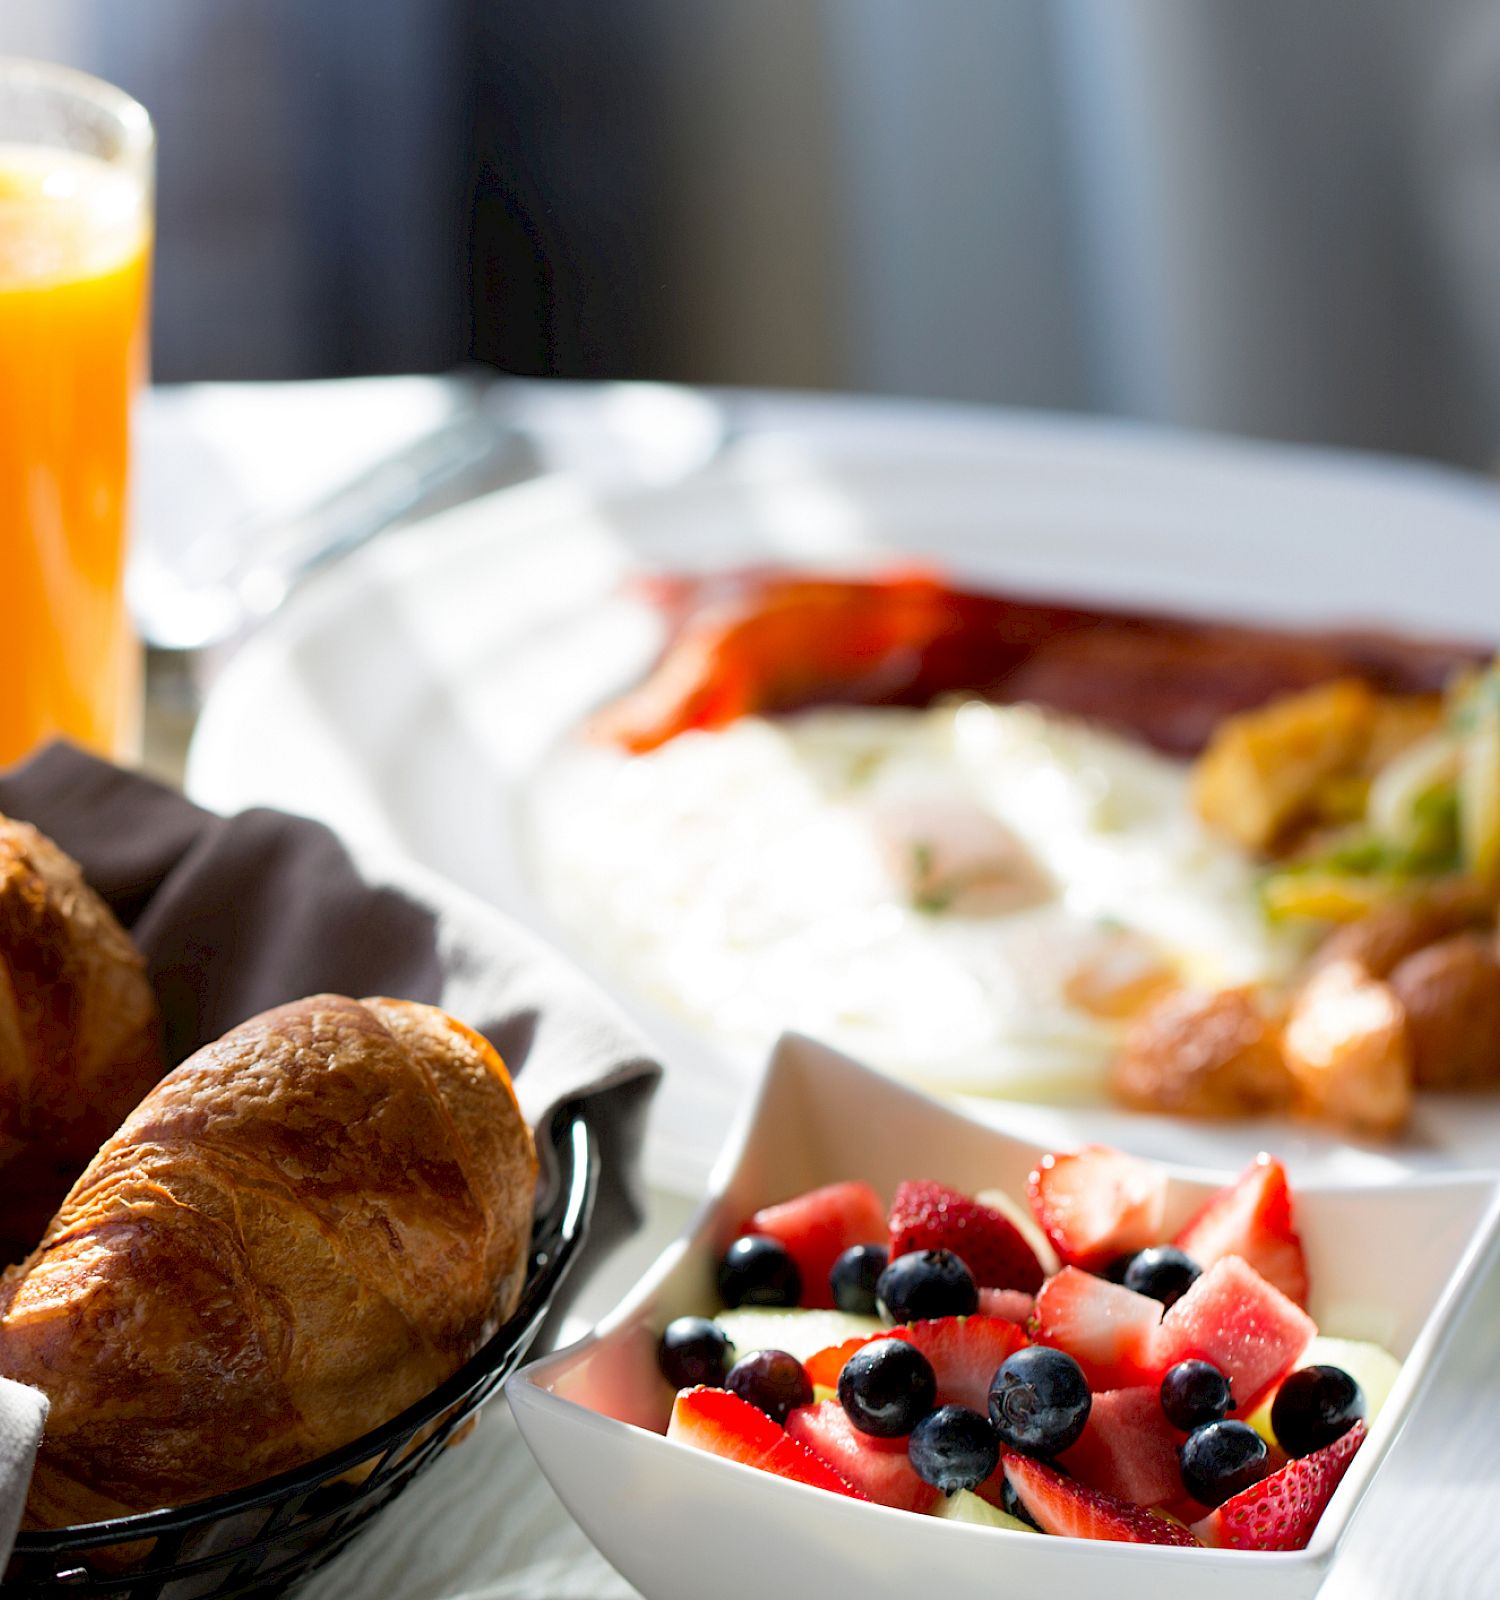 A breakfast spread with croissants, fruit, and eggs.